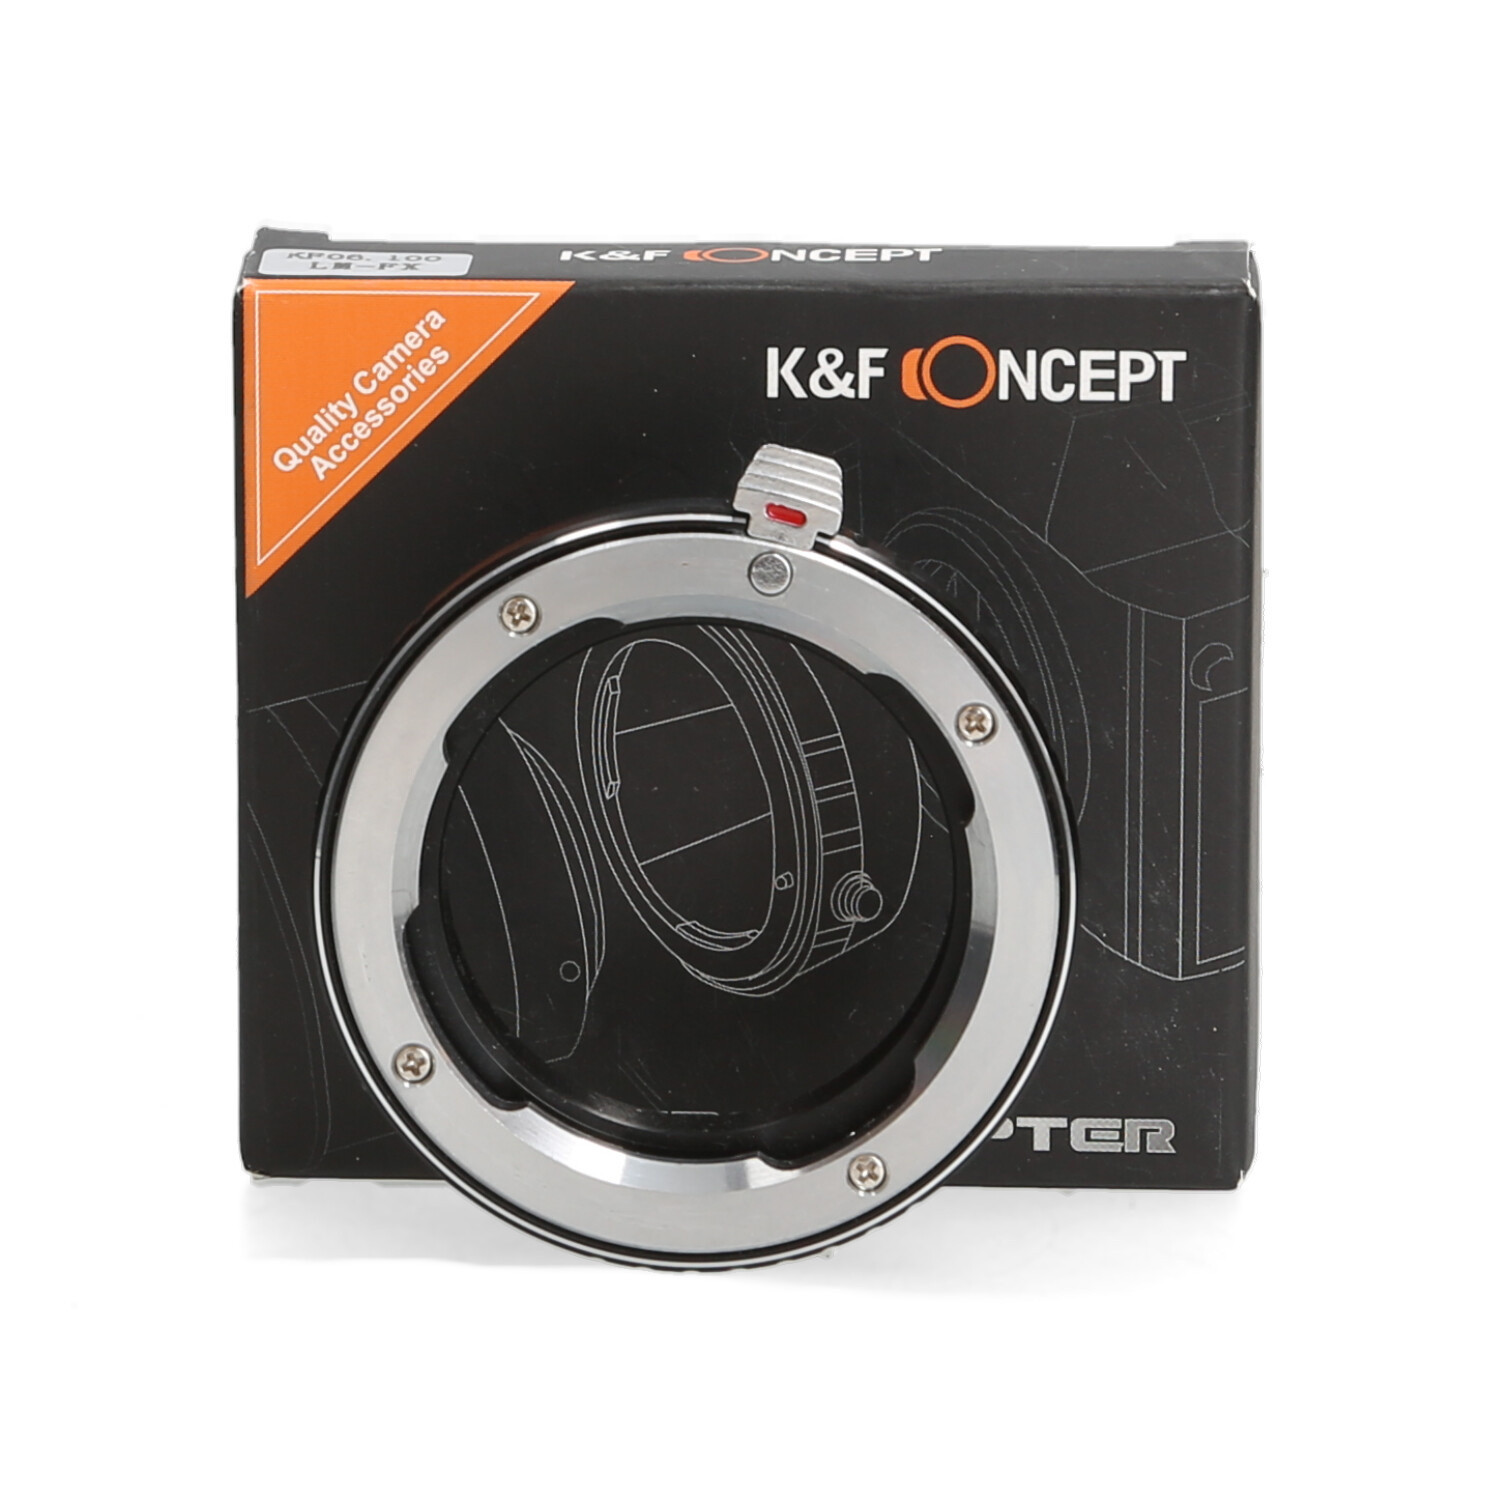 K&F Concept KF Concept LMFX Lens Adapter Ring for Leica LM Lens to Fujifilm X FX